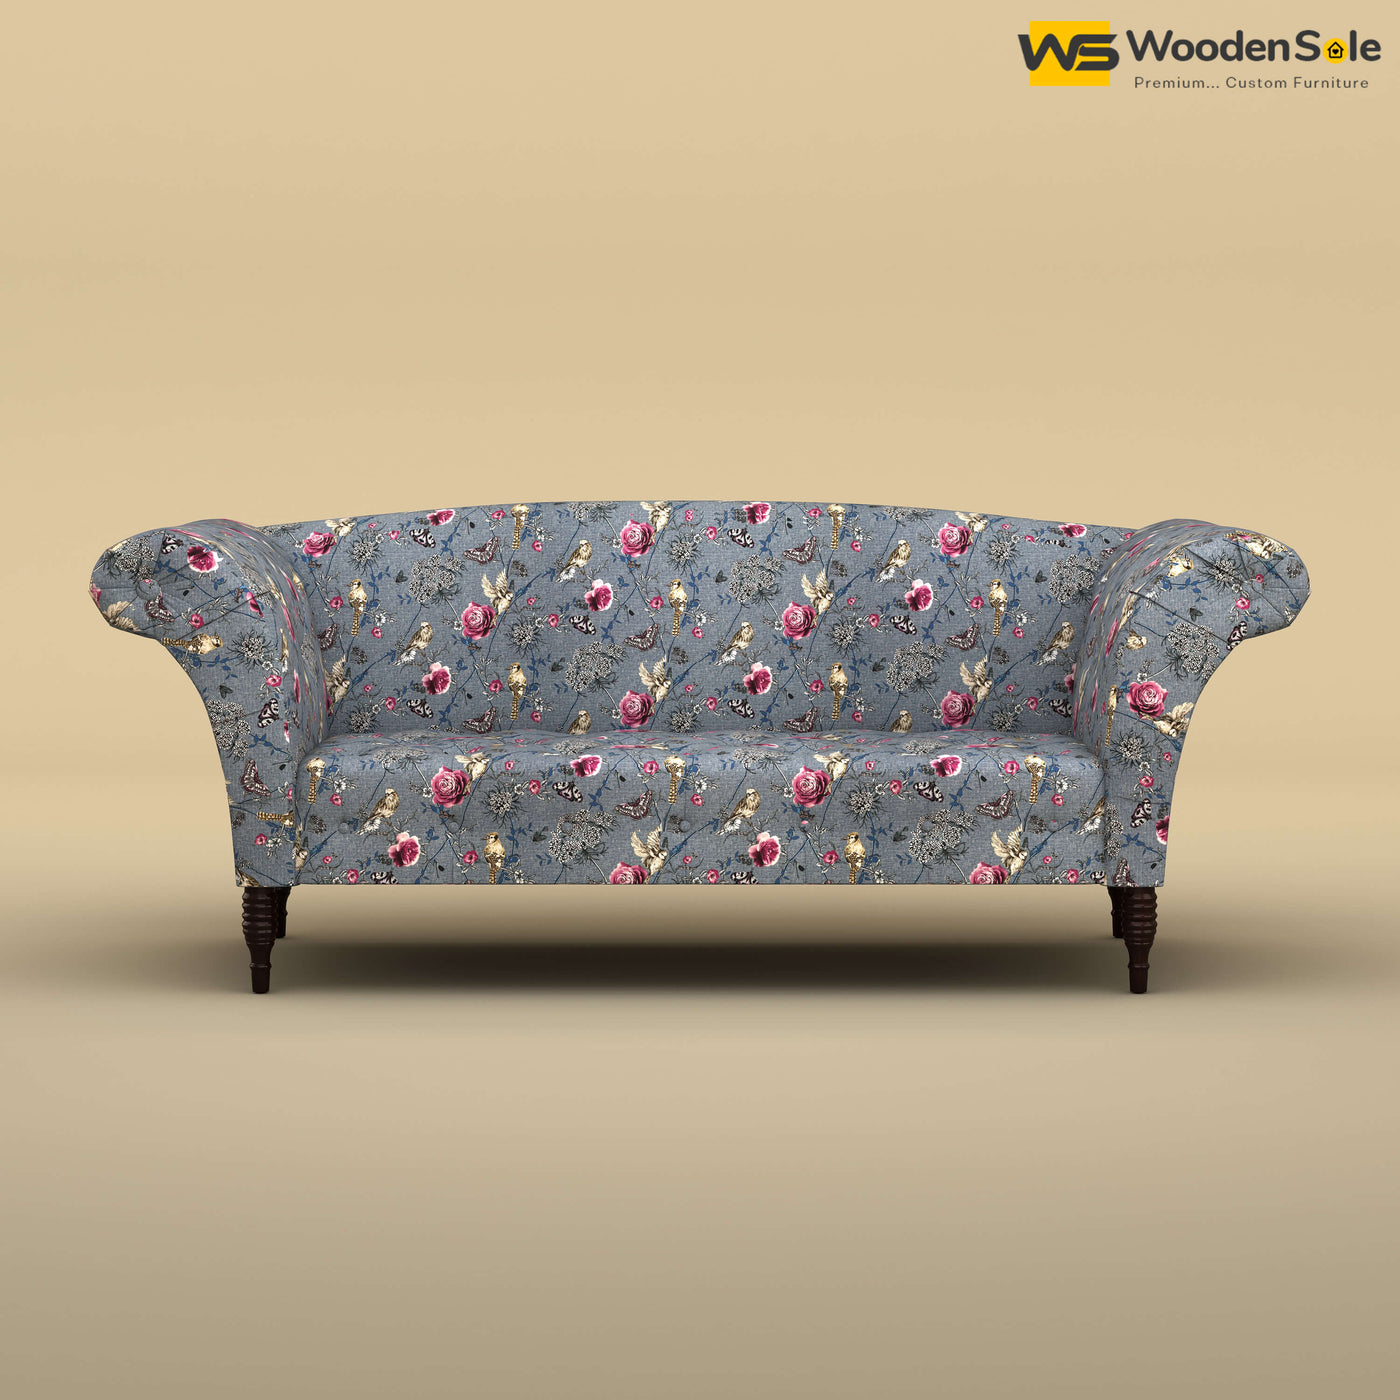 Leo Chaise Lounge (Cotton, Floral Printed)